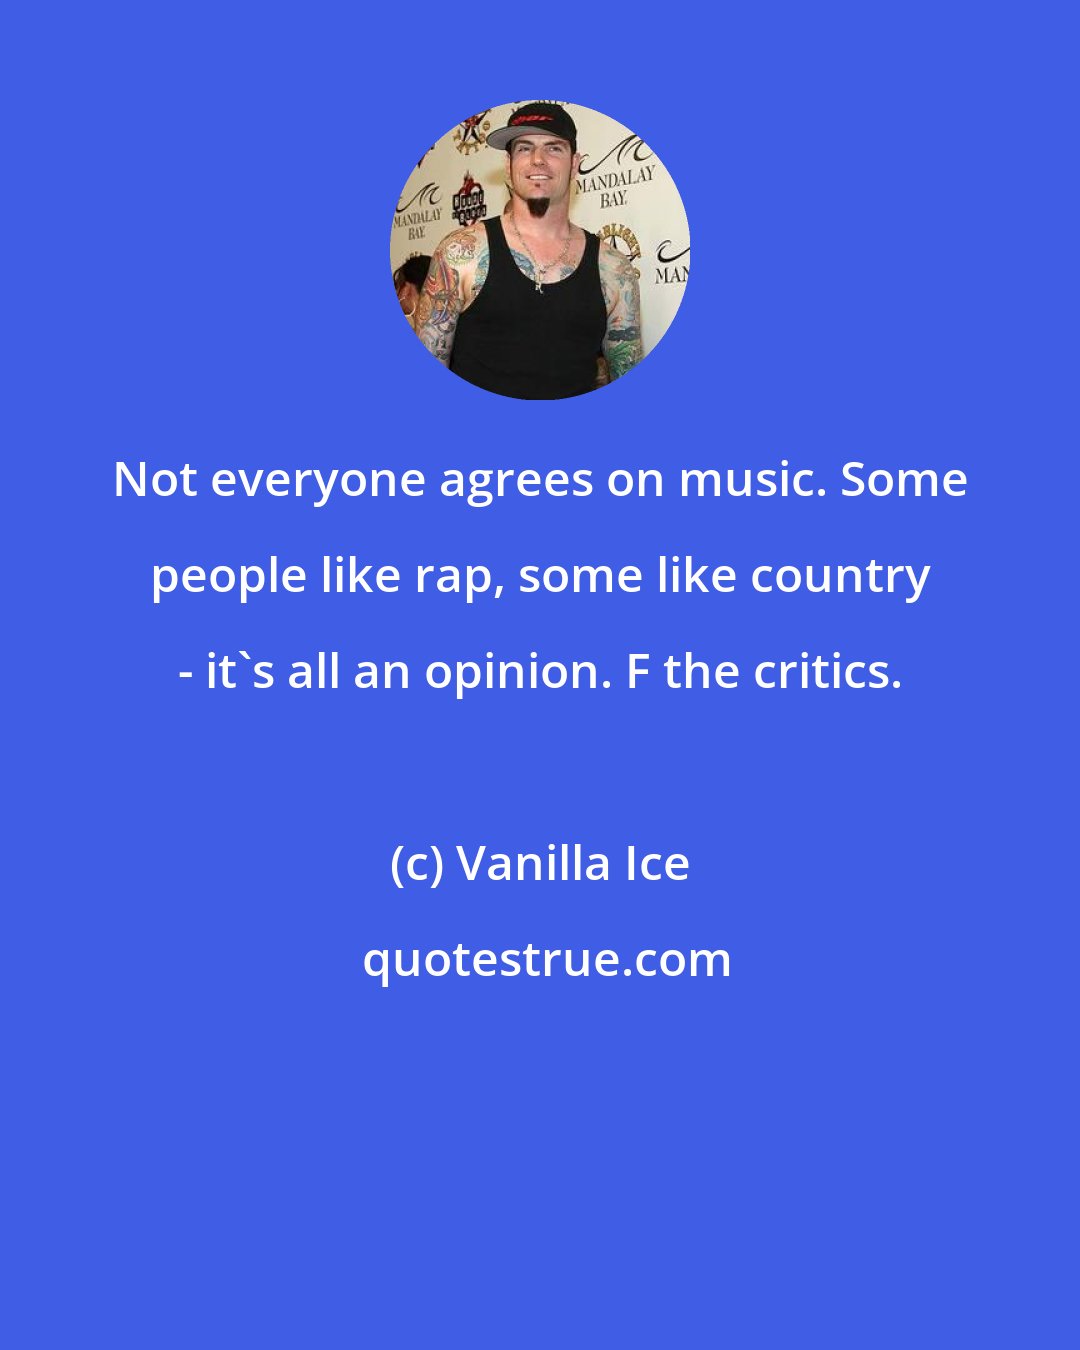 Vanilla Ice: Not everyone agrees on music. Some people like rap, some like country - it's all an opinion. F the critics.